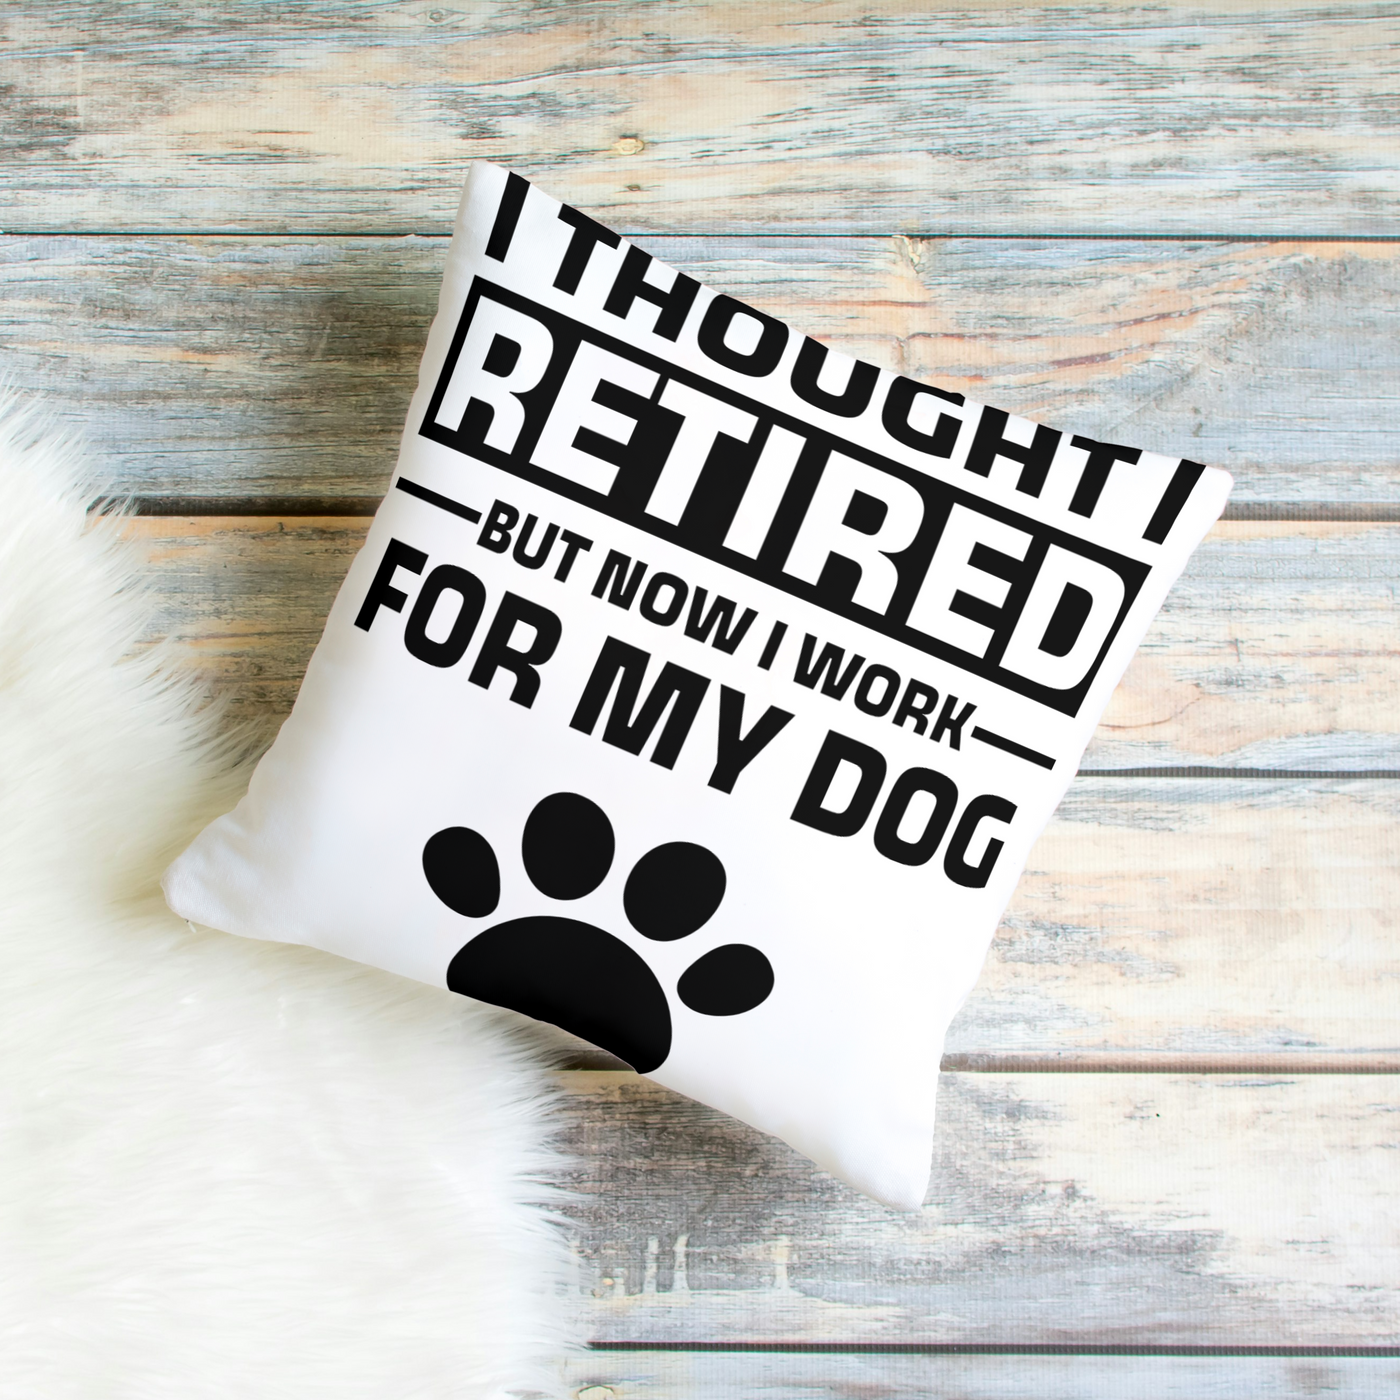 I Thought I Retired But Now I Work For My Dog Square Pillow